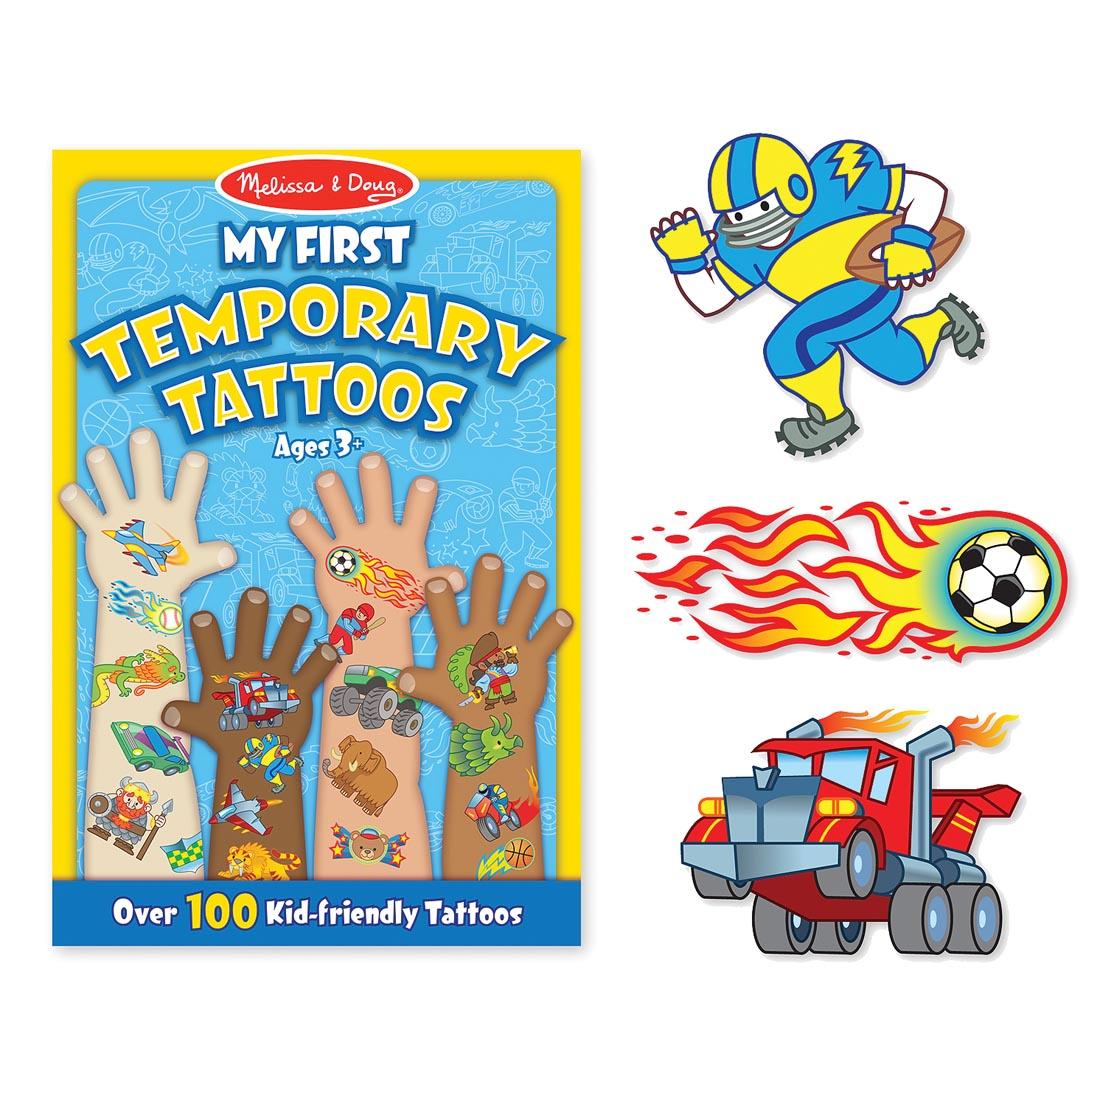 My First Temporary Tattoos include a football player, a flaming soccer ball and a truck